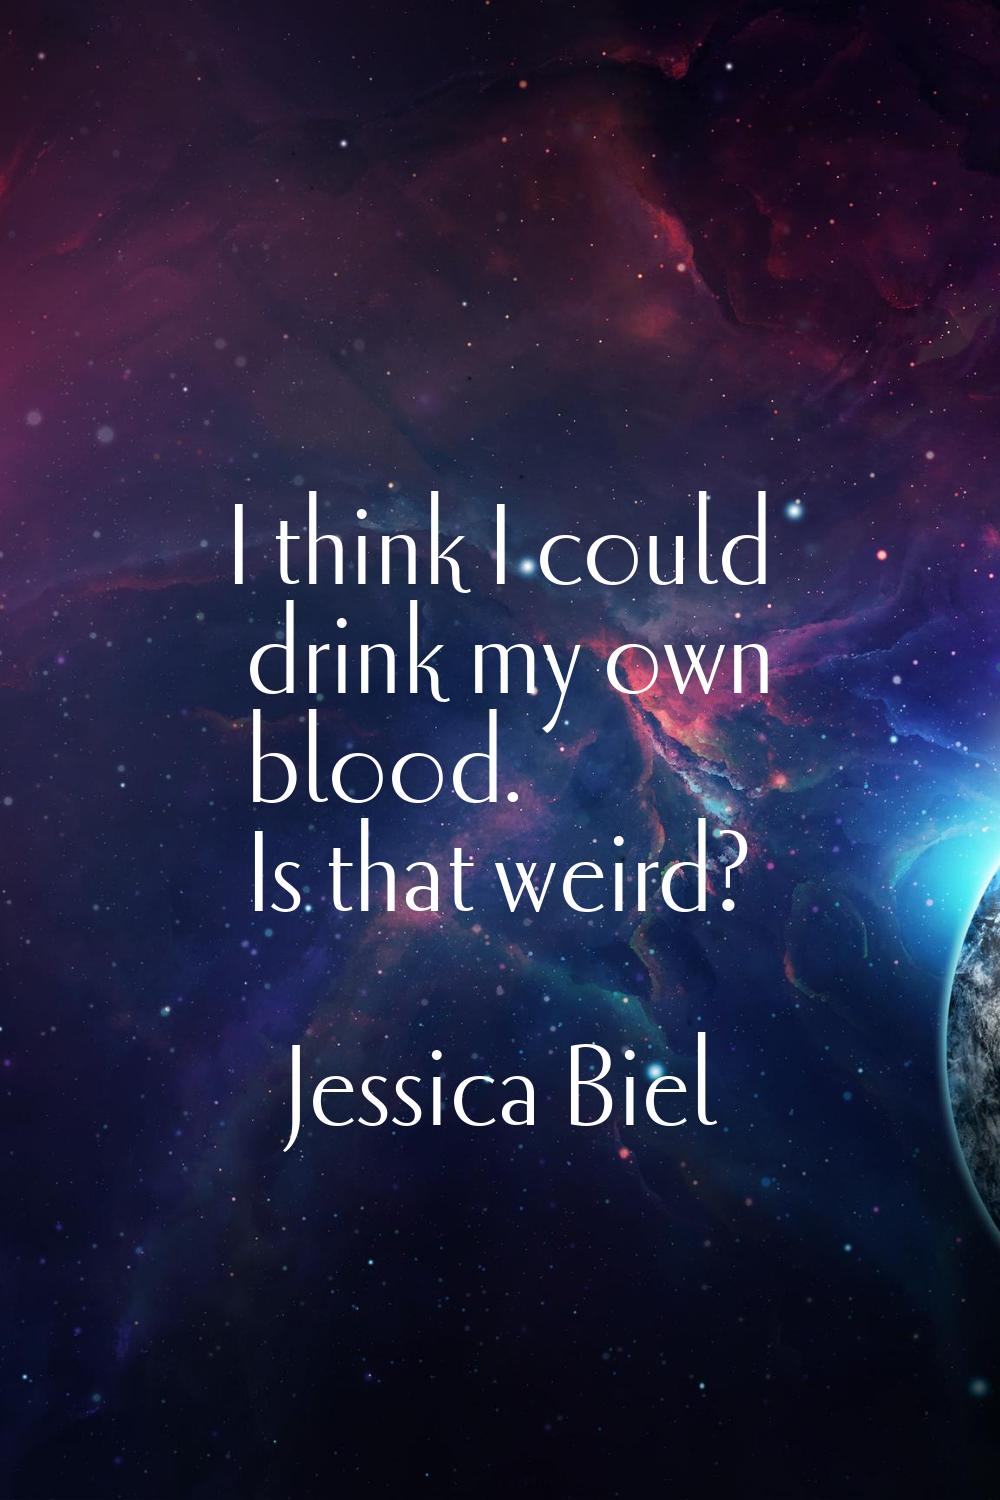 I think I could drink my own blood. Is that weird?